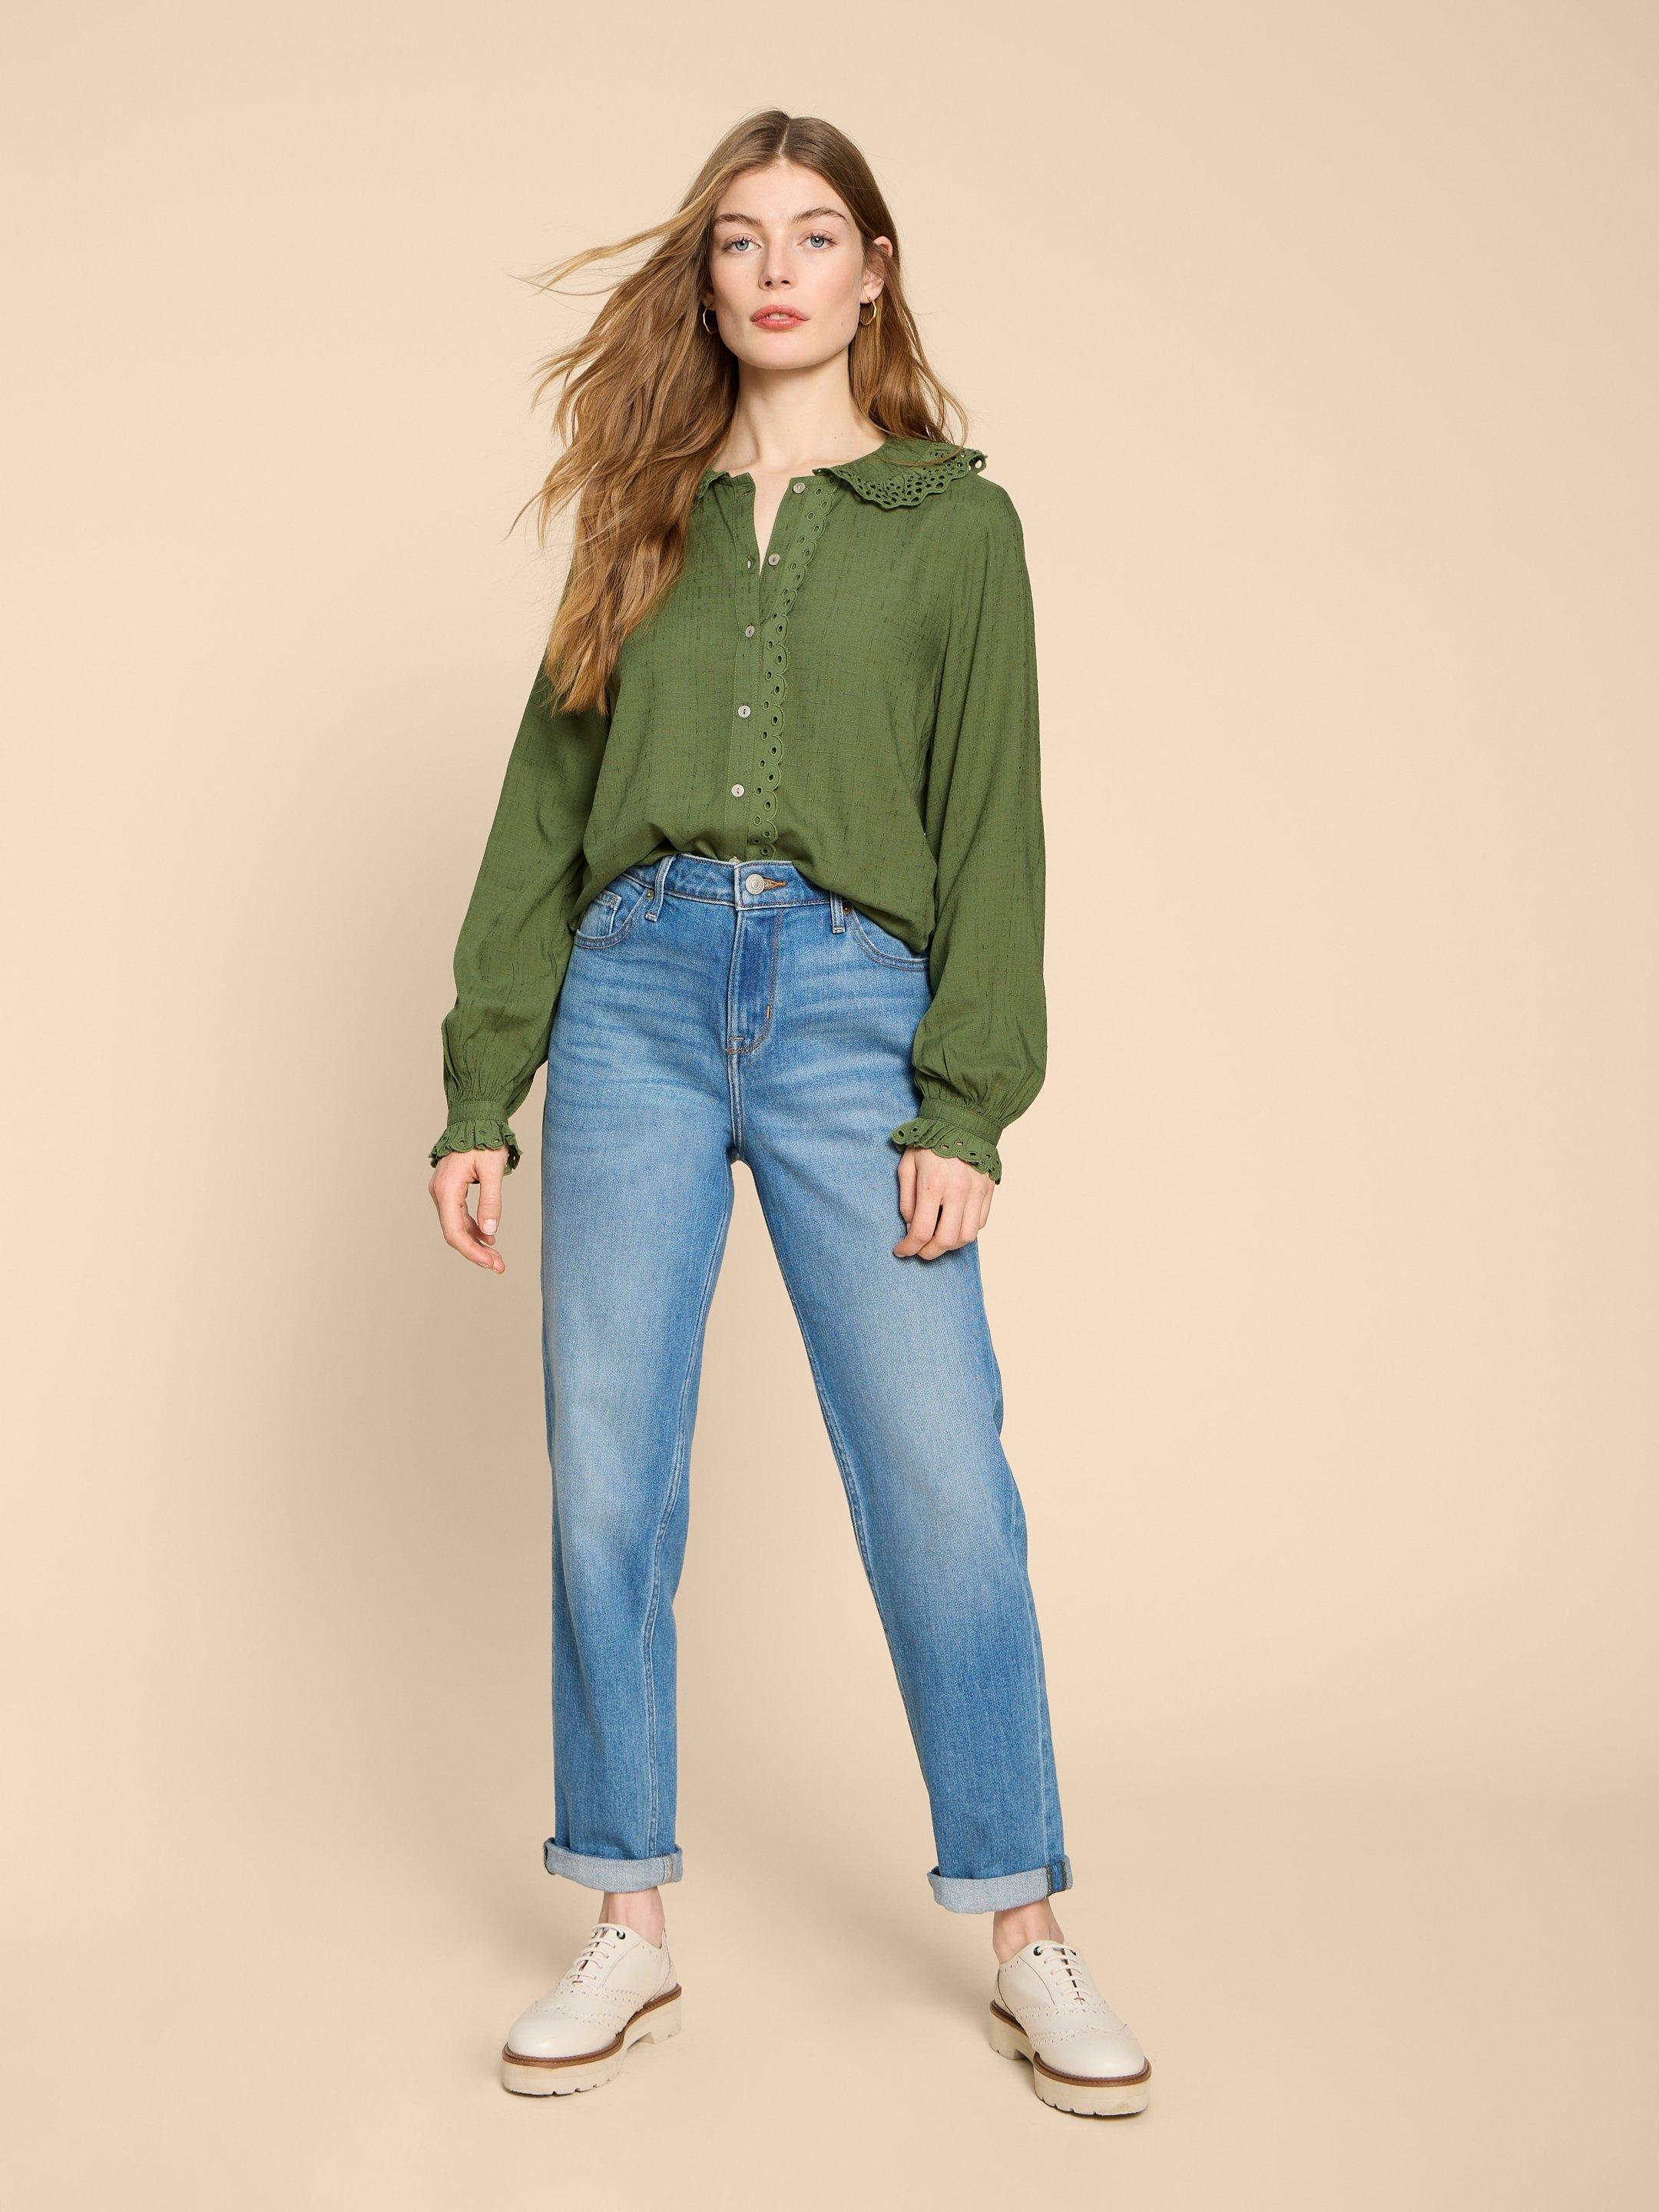 Lara Broderie Shirt in MID GREEN - MODEL FRONT